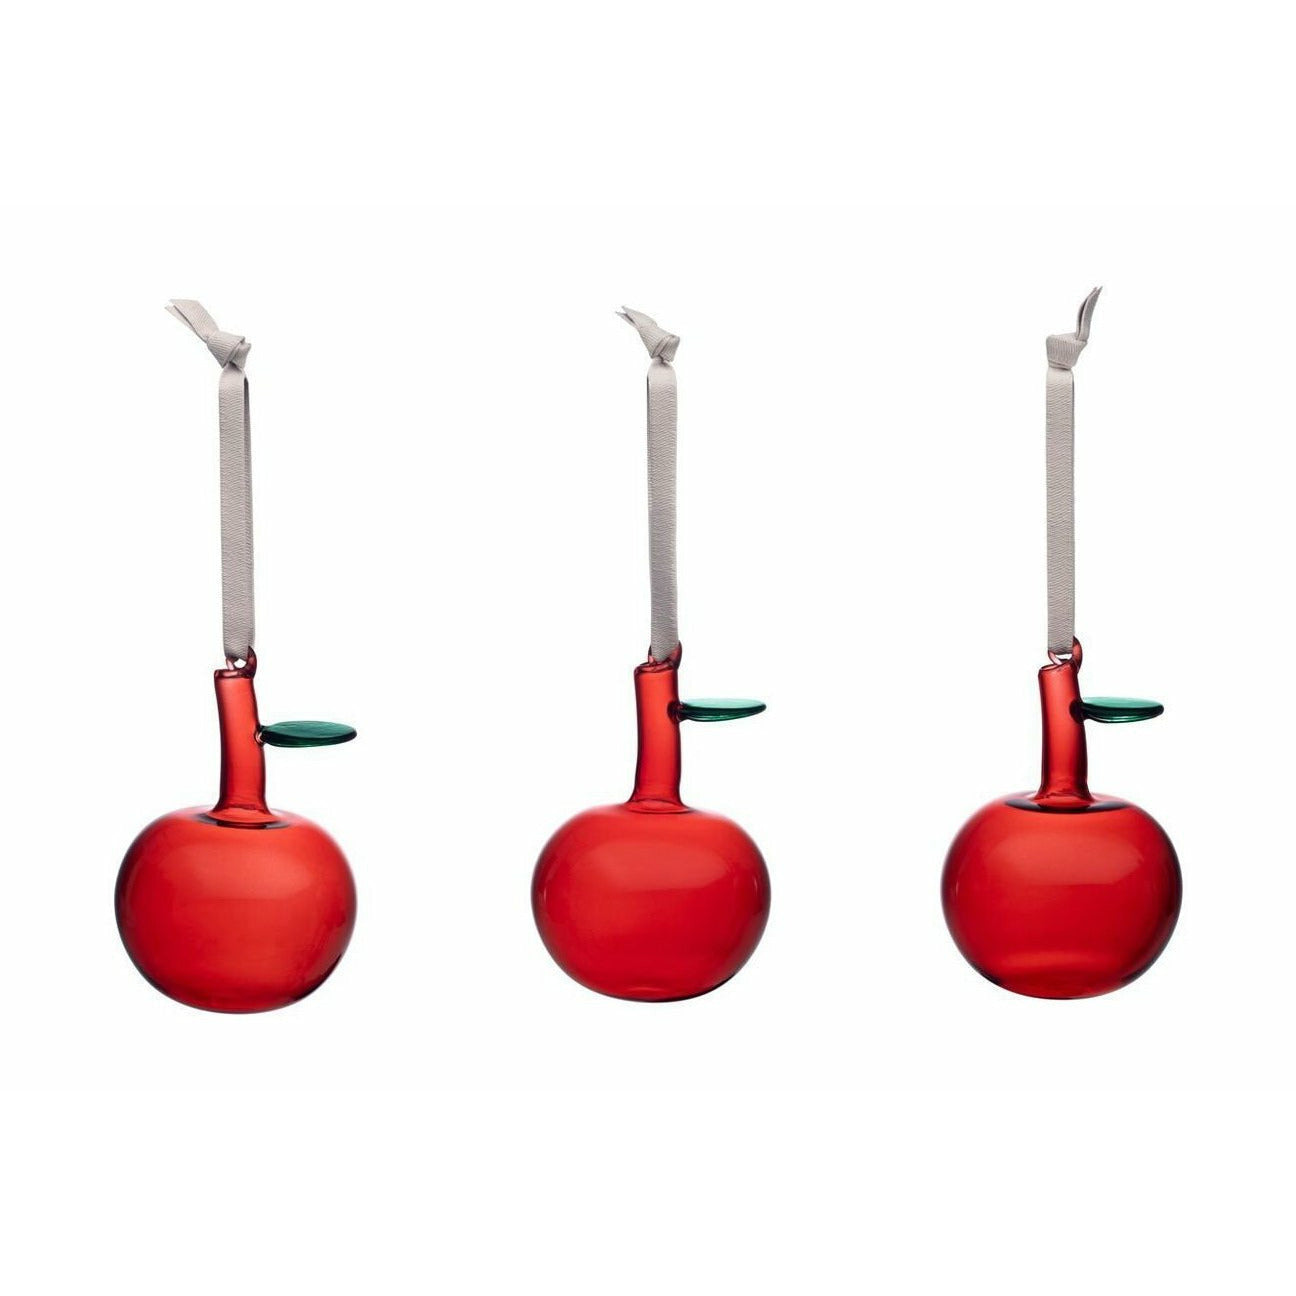 Iittala Decorations Glass Apples, Set Of 3, Red